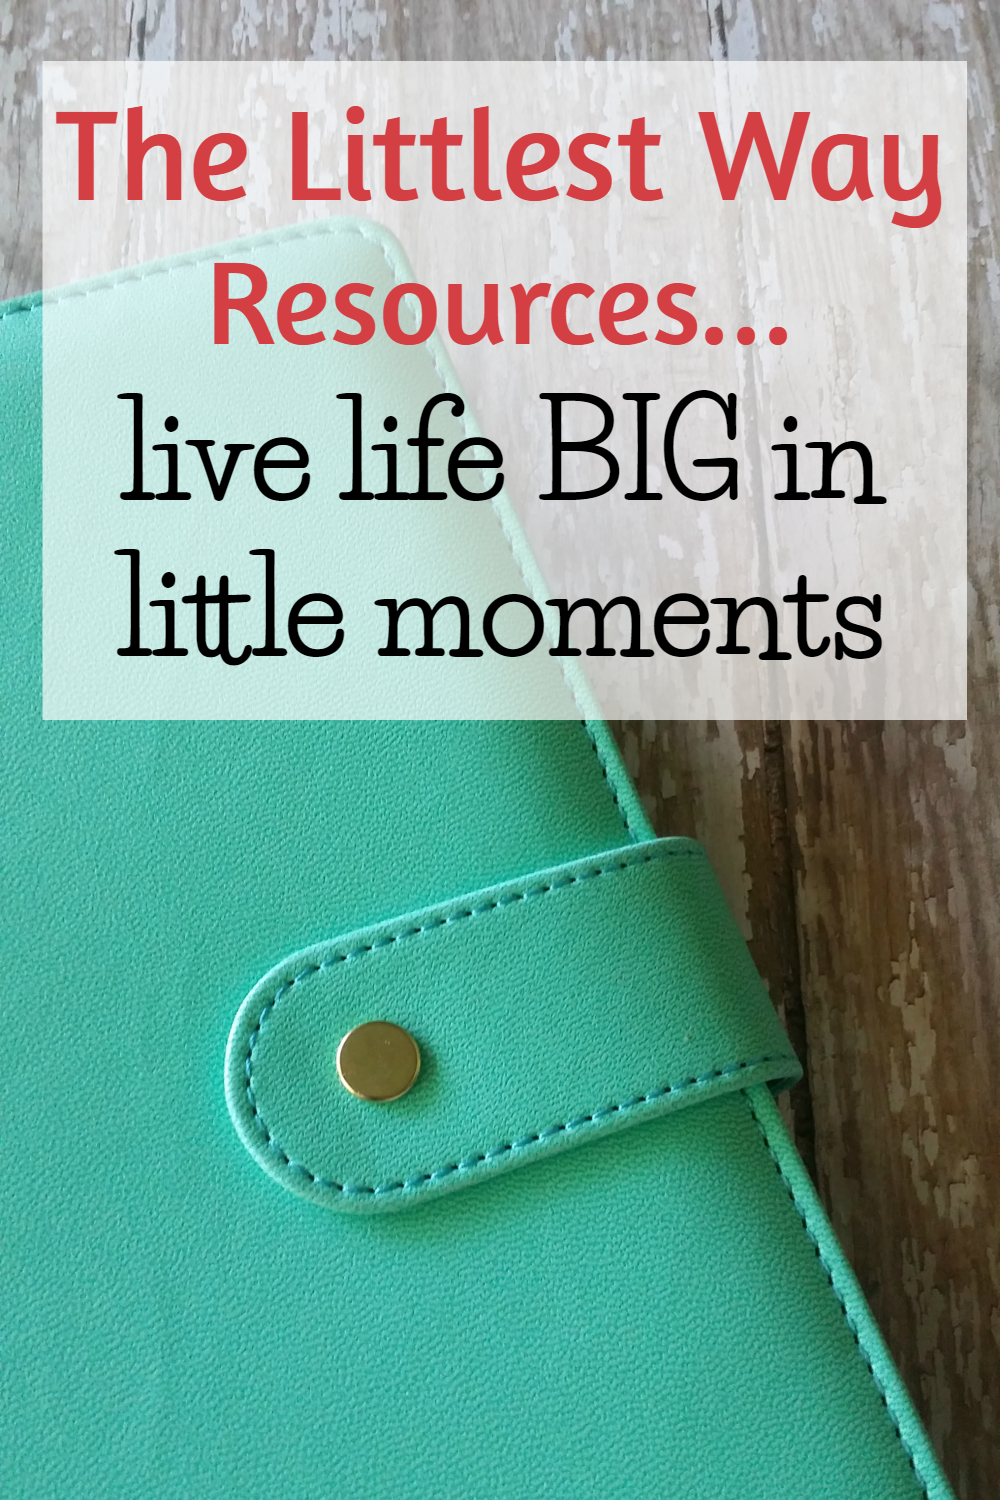 The Littlest Way Resources to products and stores I recommend to family and friends